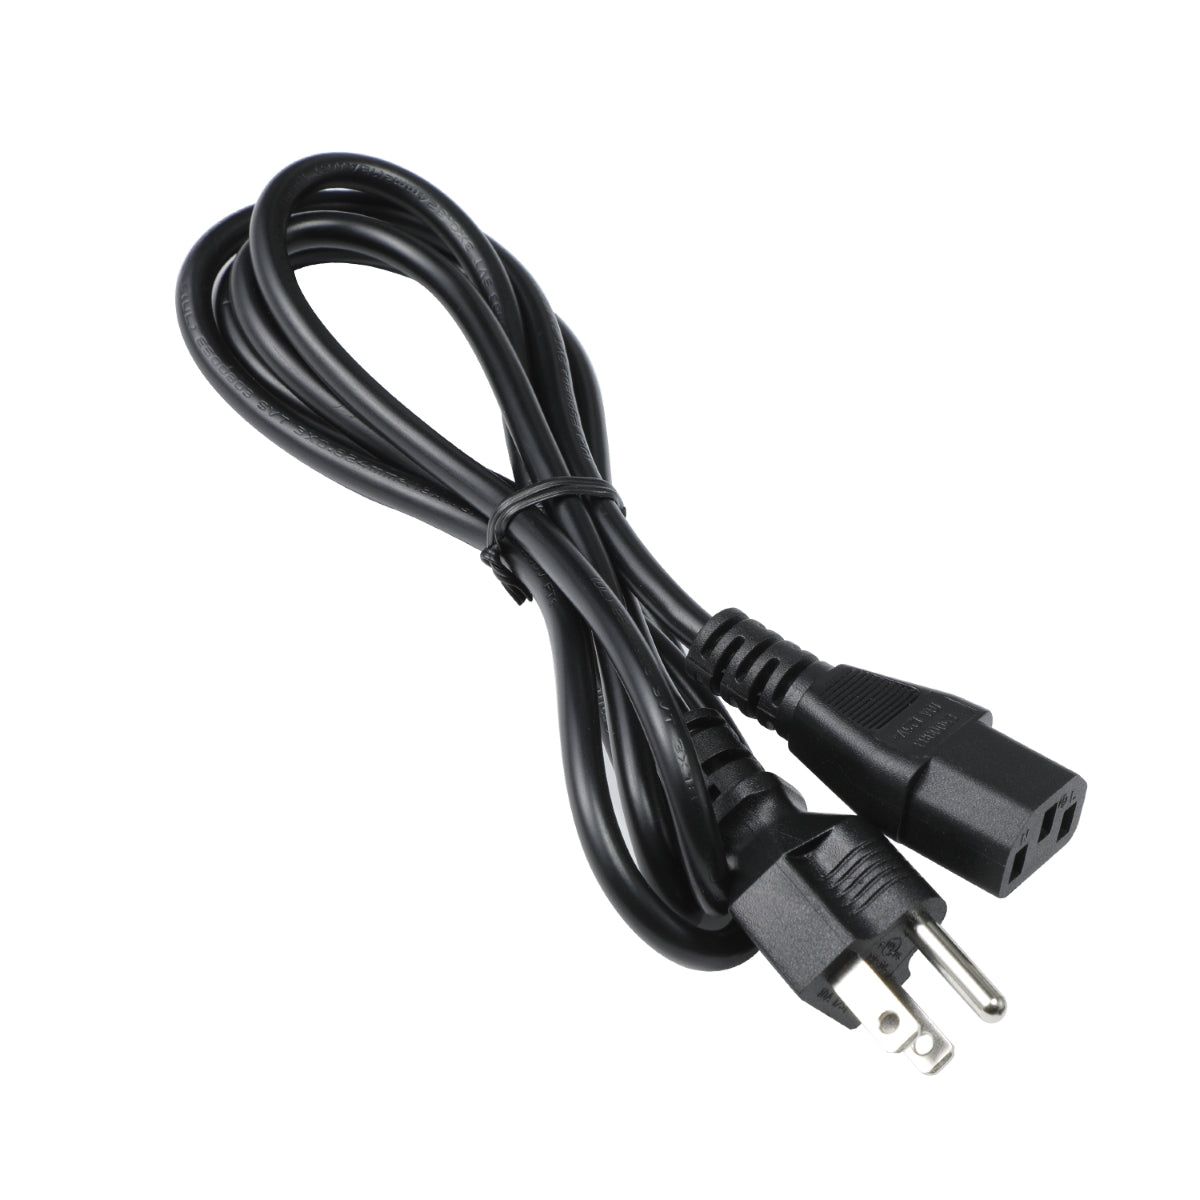 Power Cord for AOC 24G2 Monitor